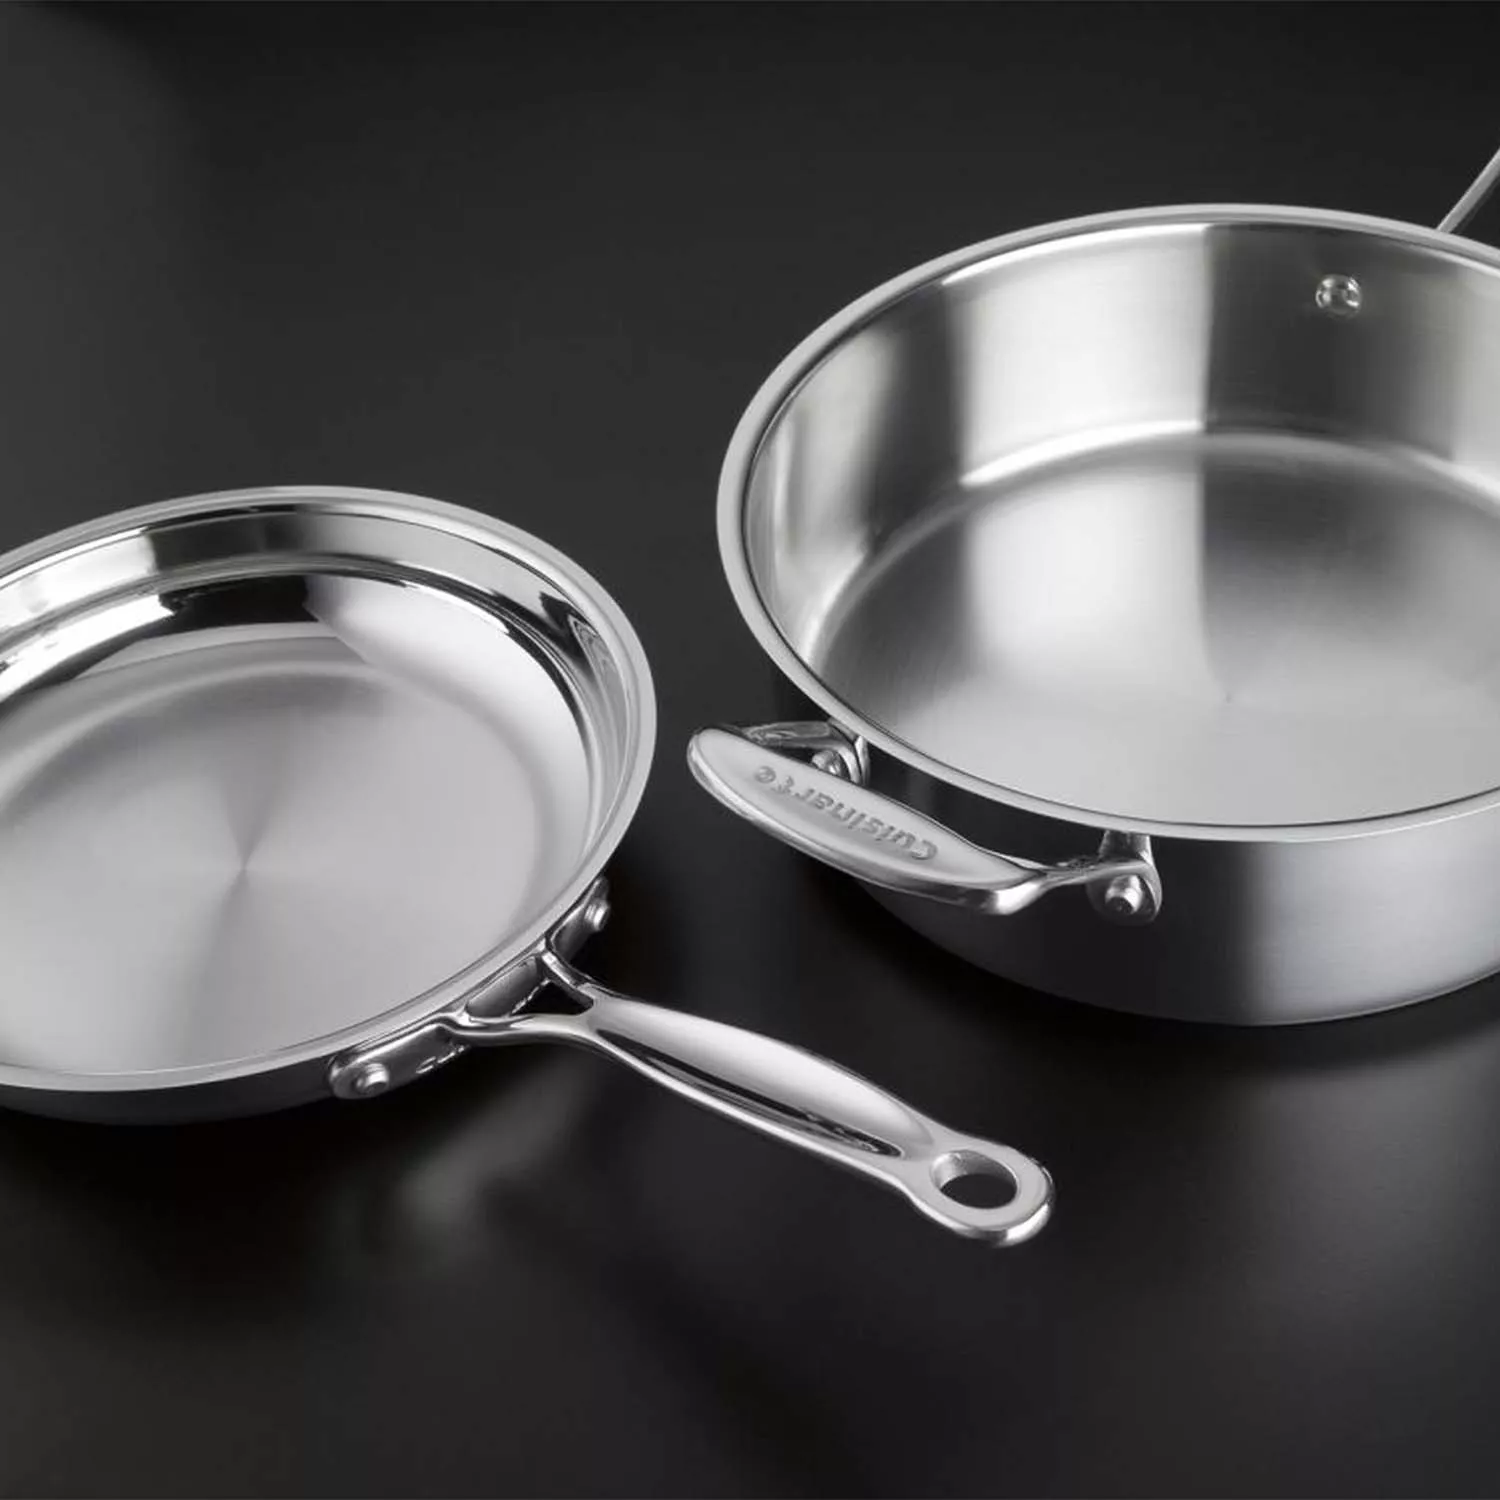 Cuisinart Chefs Classic Stainless 10-Piece Cookware Set, Silver